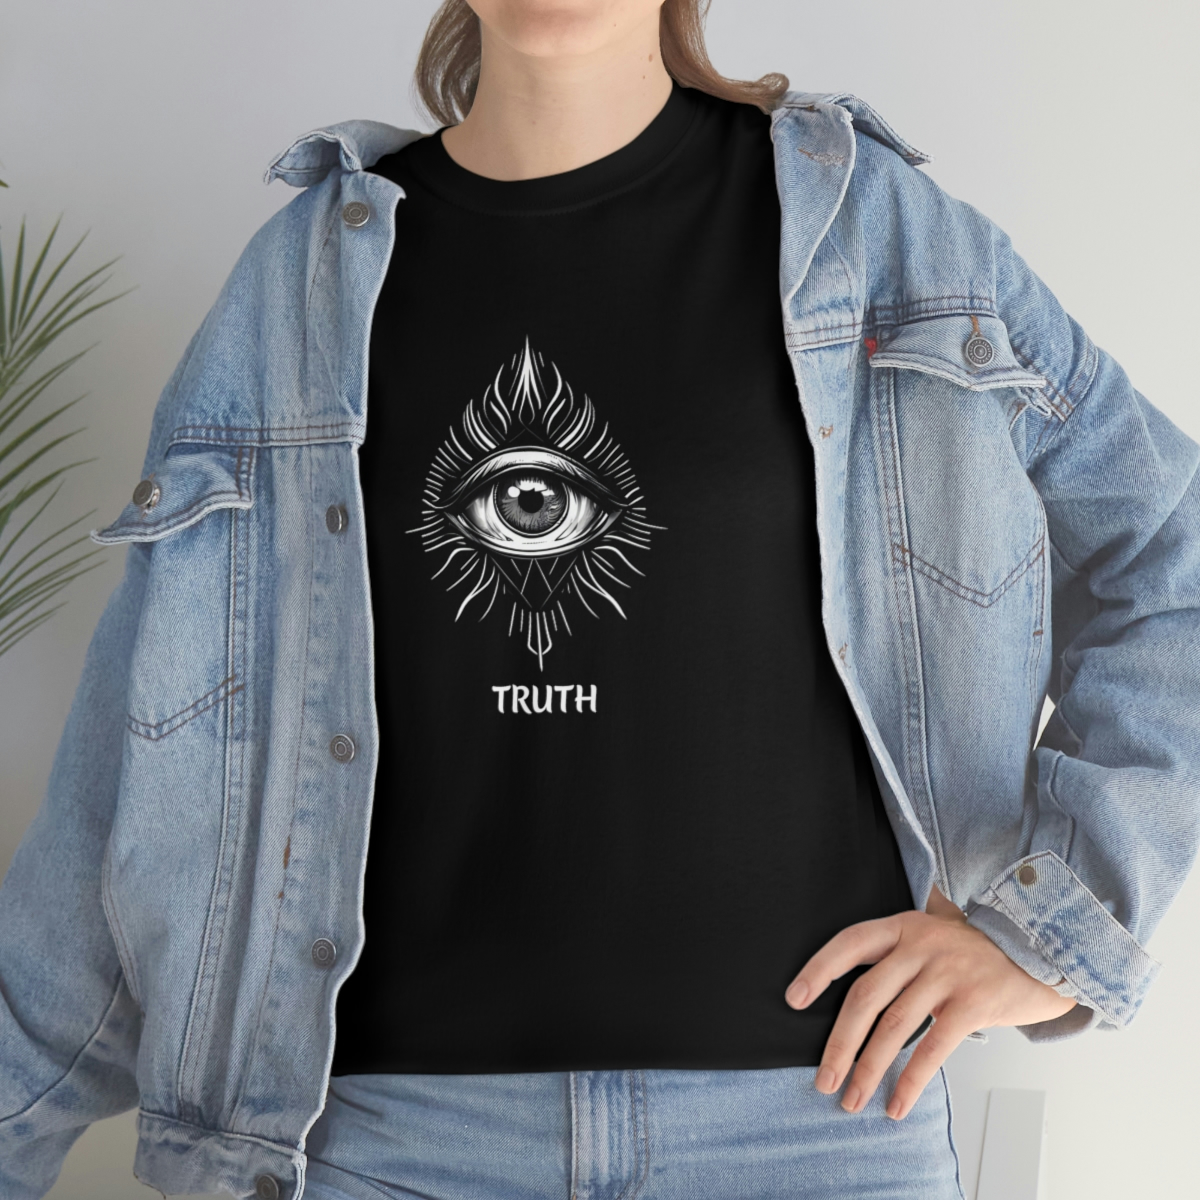 Trippy Shirts Graphic Tees: The Eye Of Truth Short Sleeve T shirt